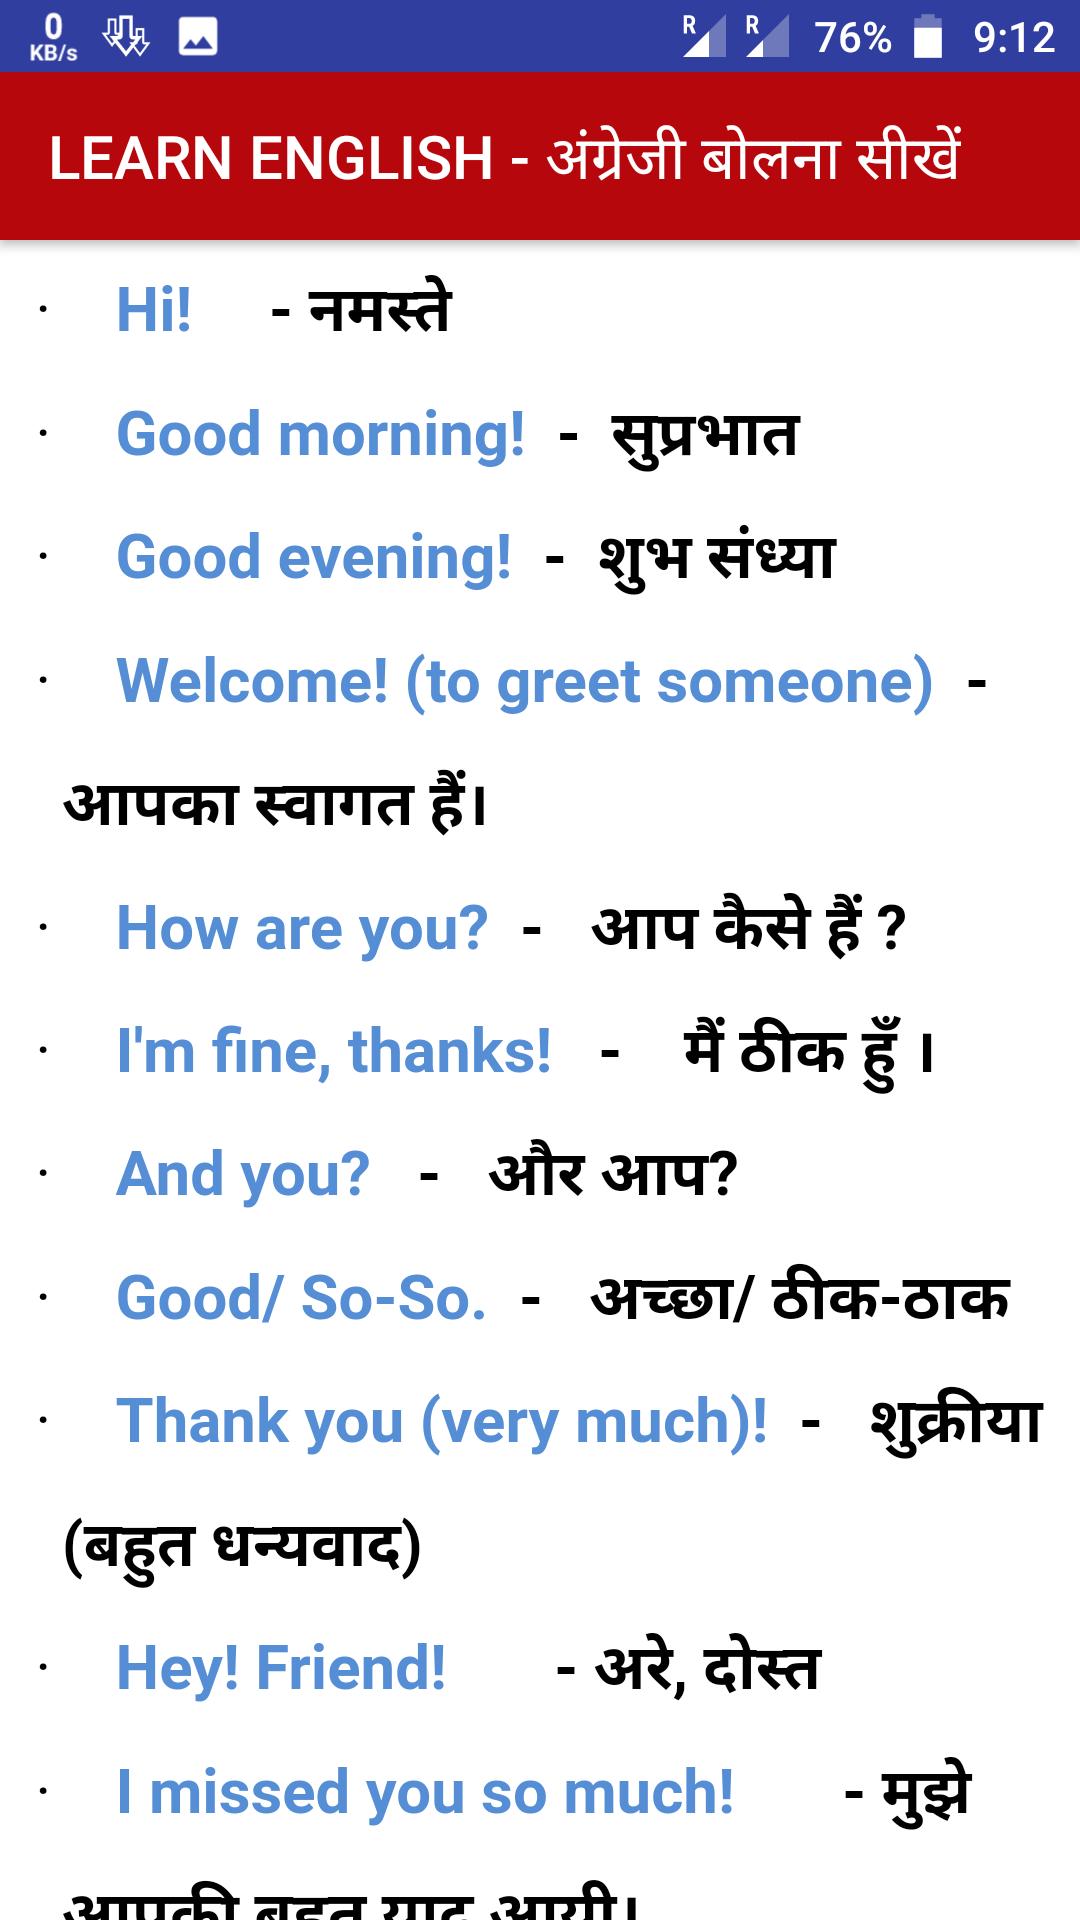 Learn English in Hindi - Spoken English in Hindi for Android - APK Download